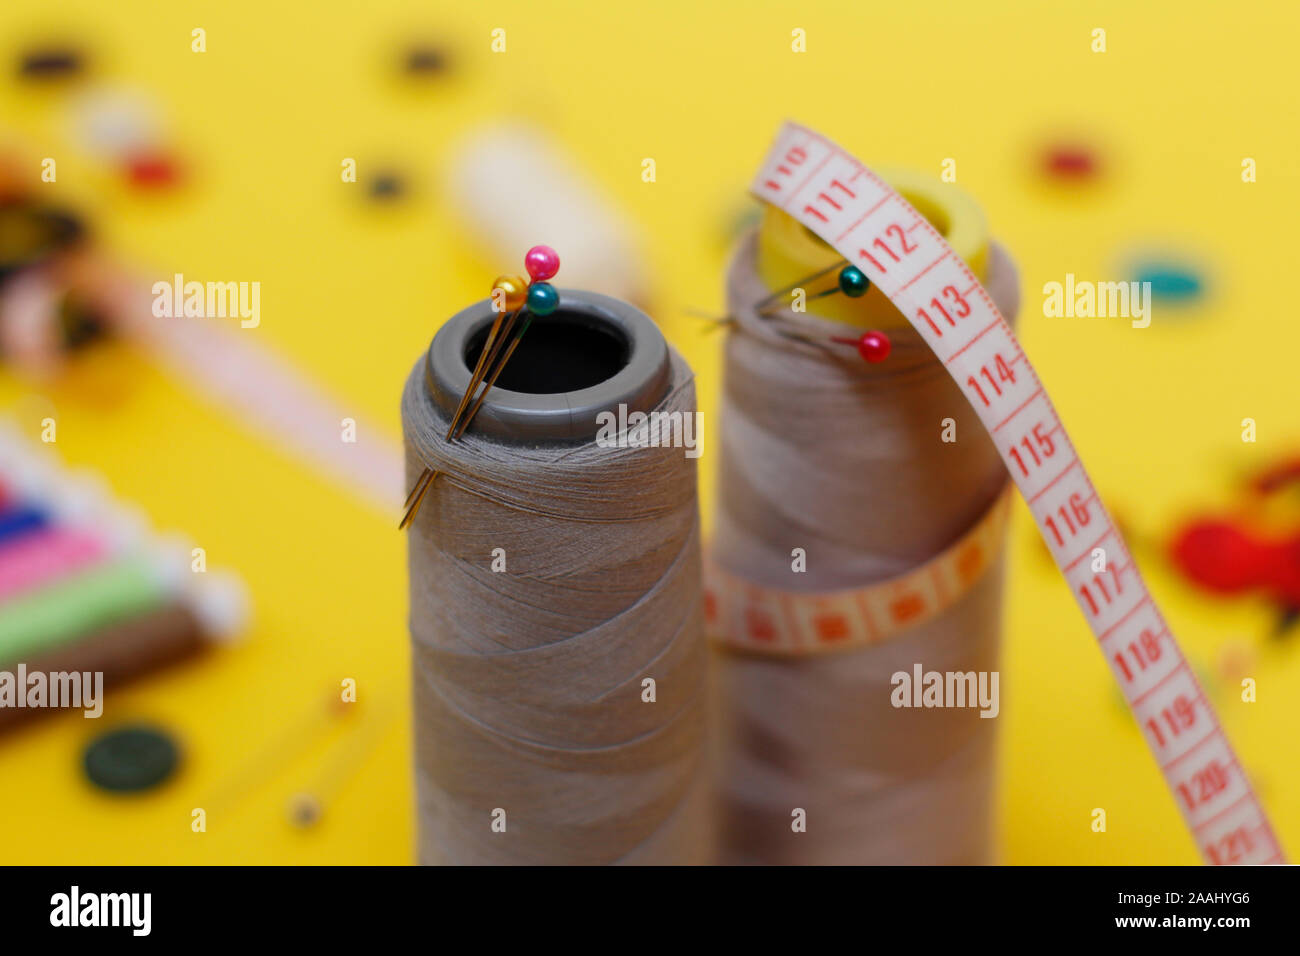 Sewing buttons and threads on a yellow background. Needlework concept. A lot of multi-colored little bobbins of sewing thread on a yellow background. Stock Photo